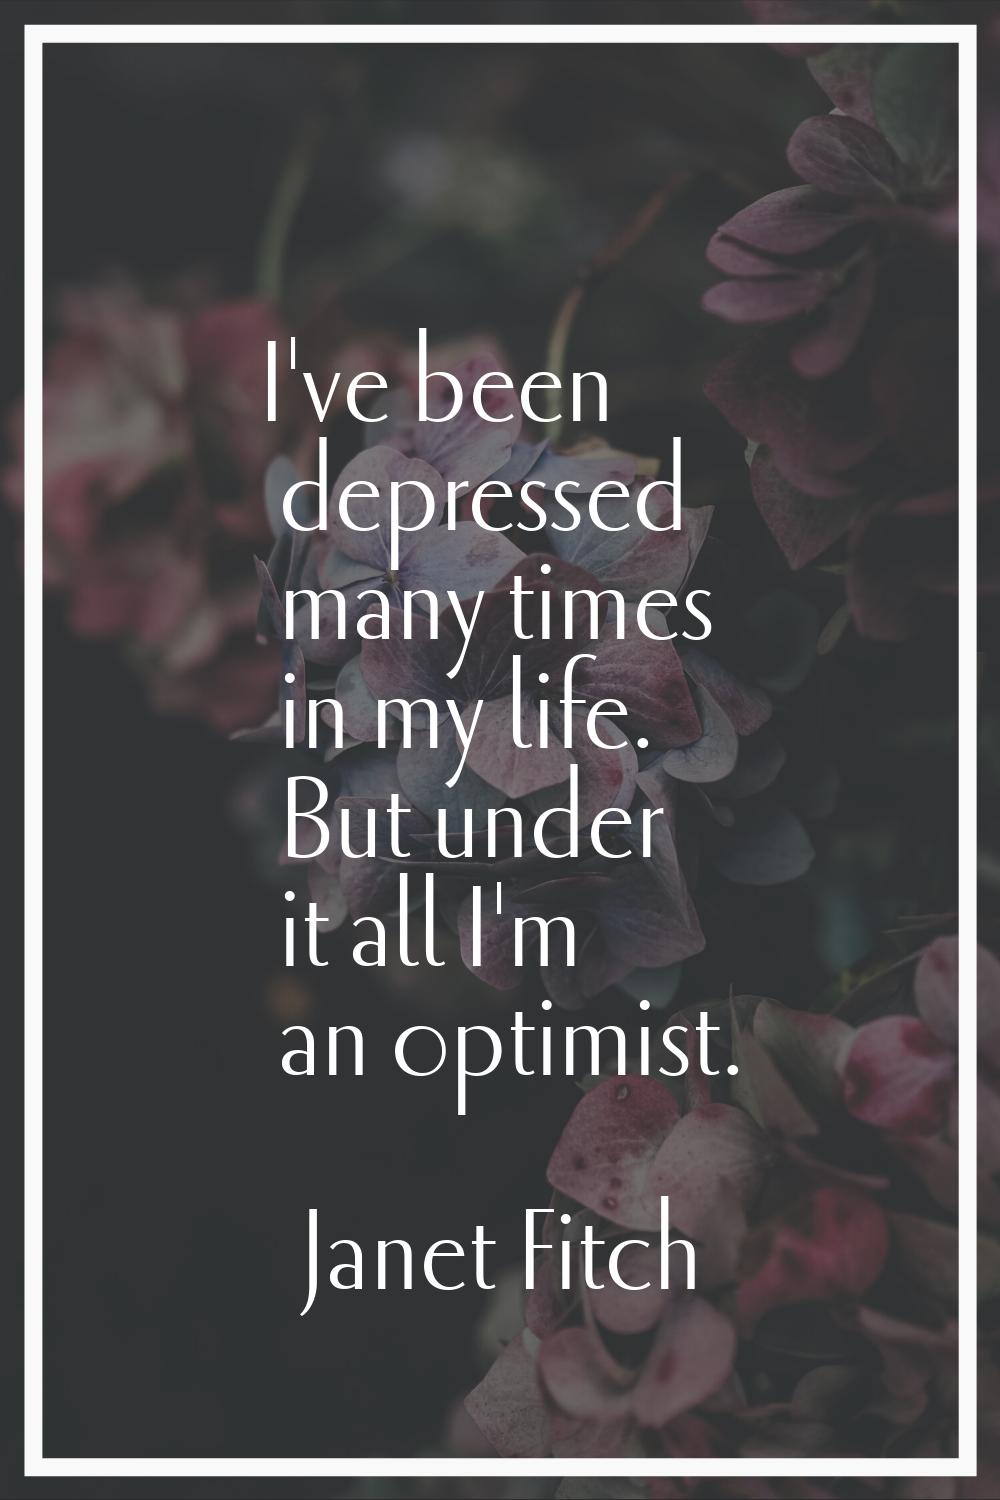 I've been depressed many times in my life. But under it all I'm an optimist.